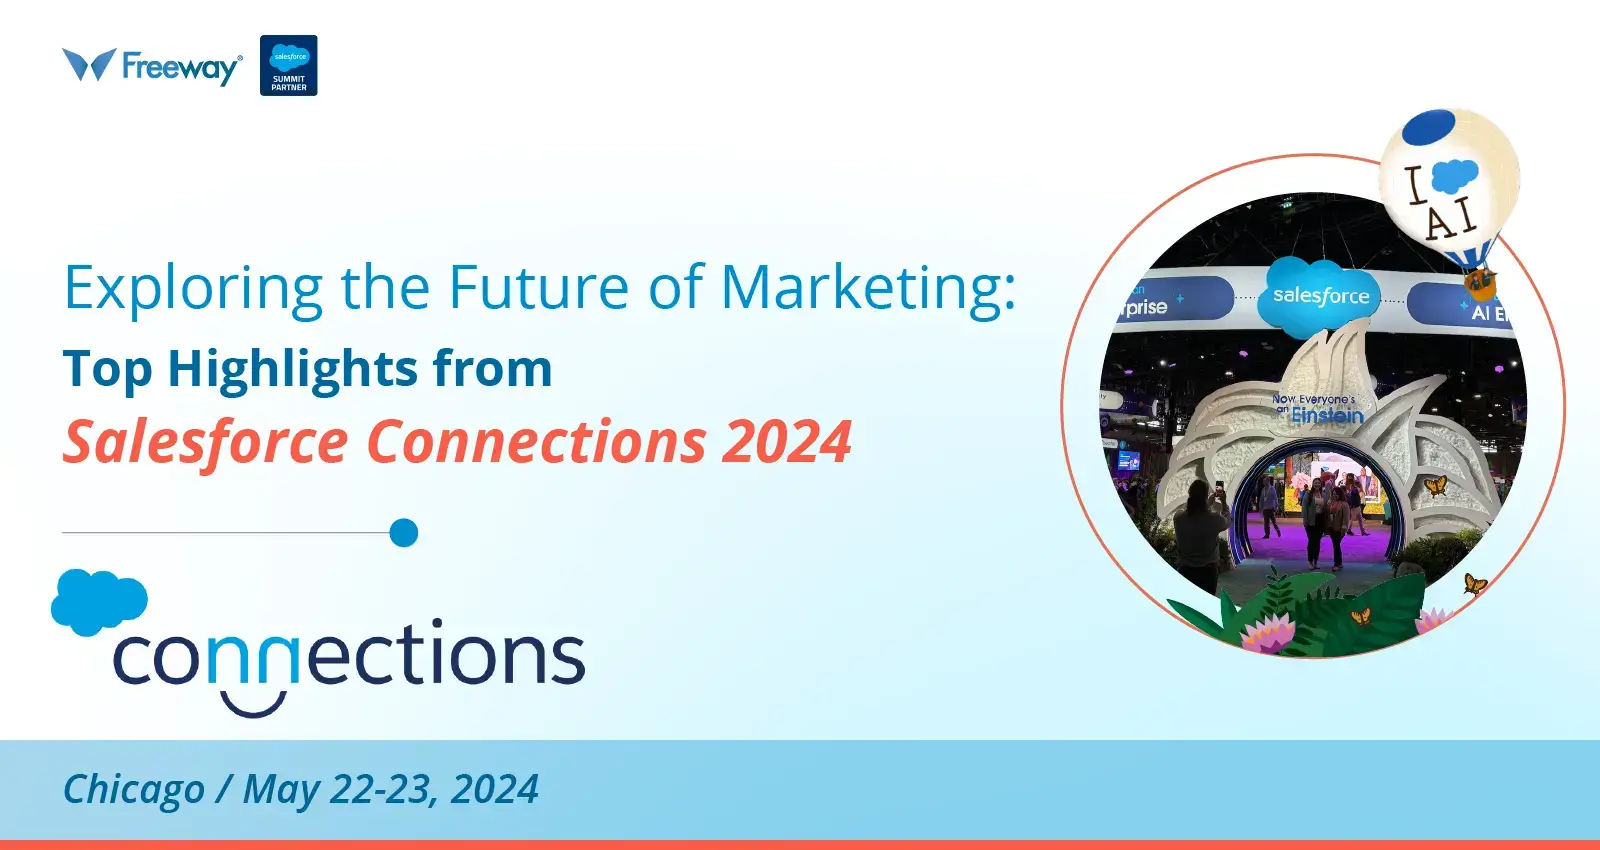 Advancing Future Marketing: Highlights from Salesforce Connections 2024